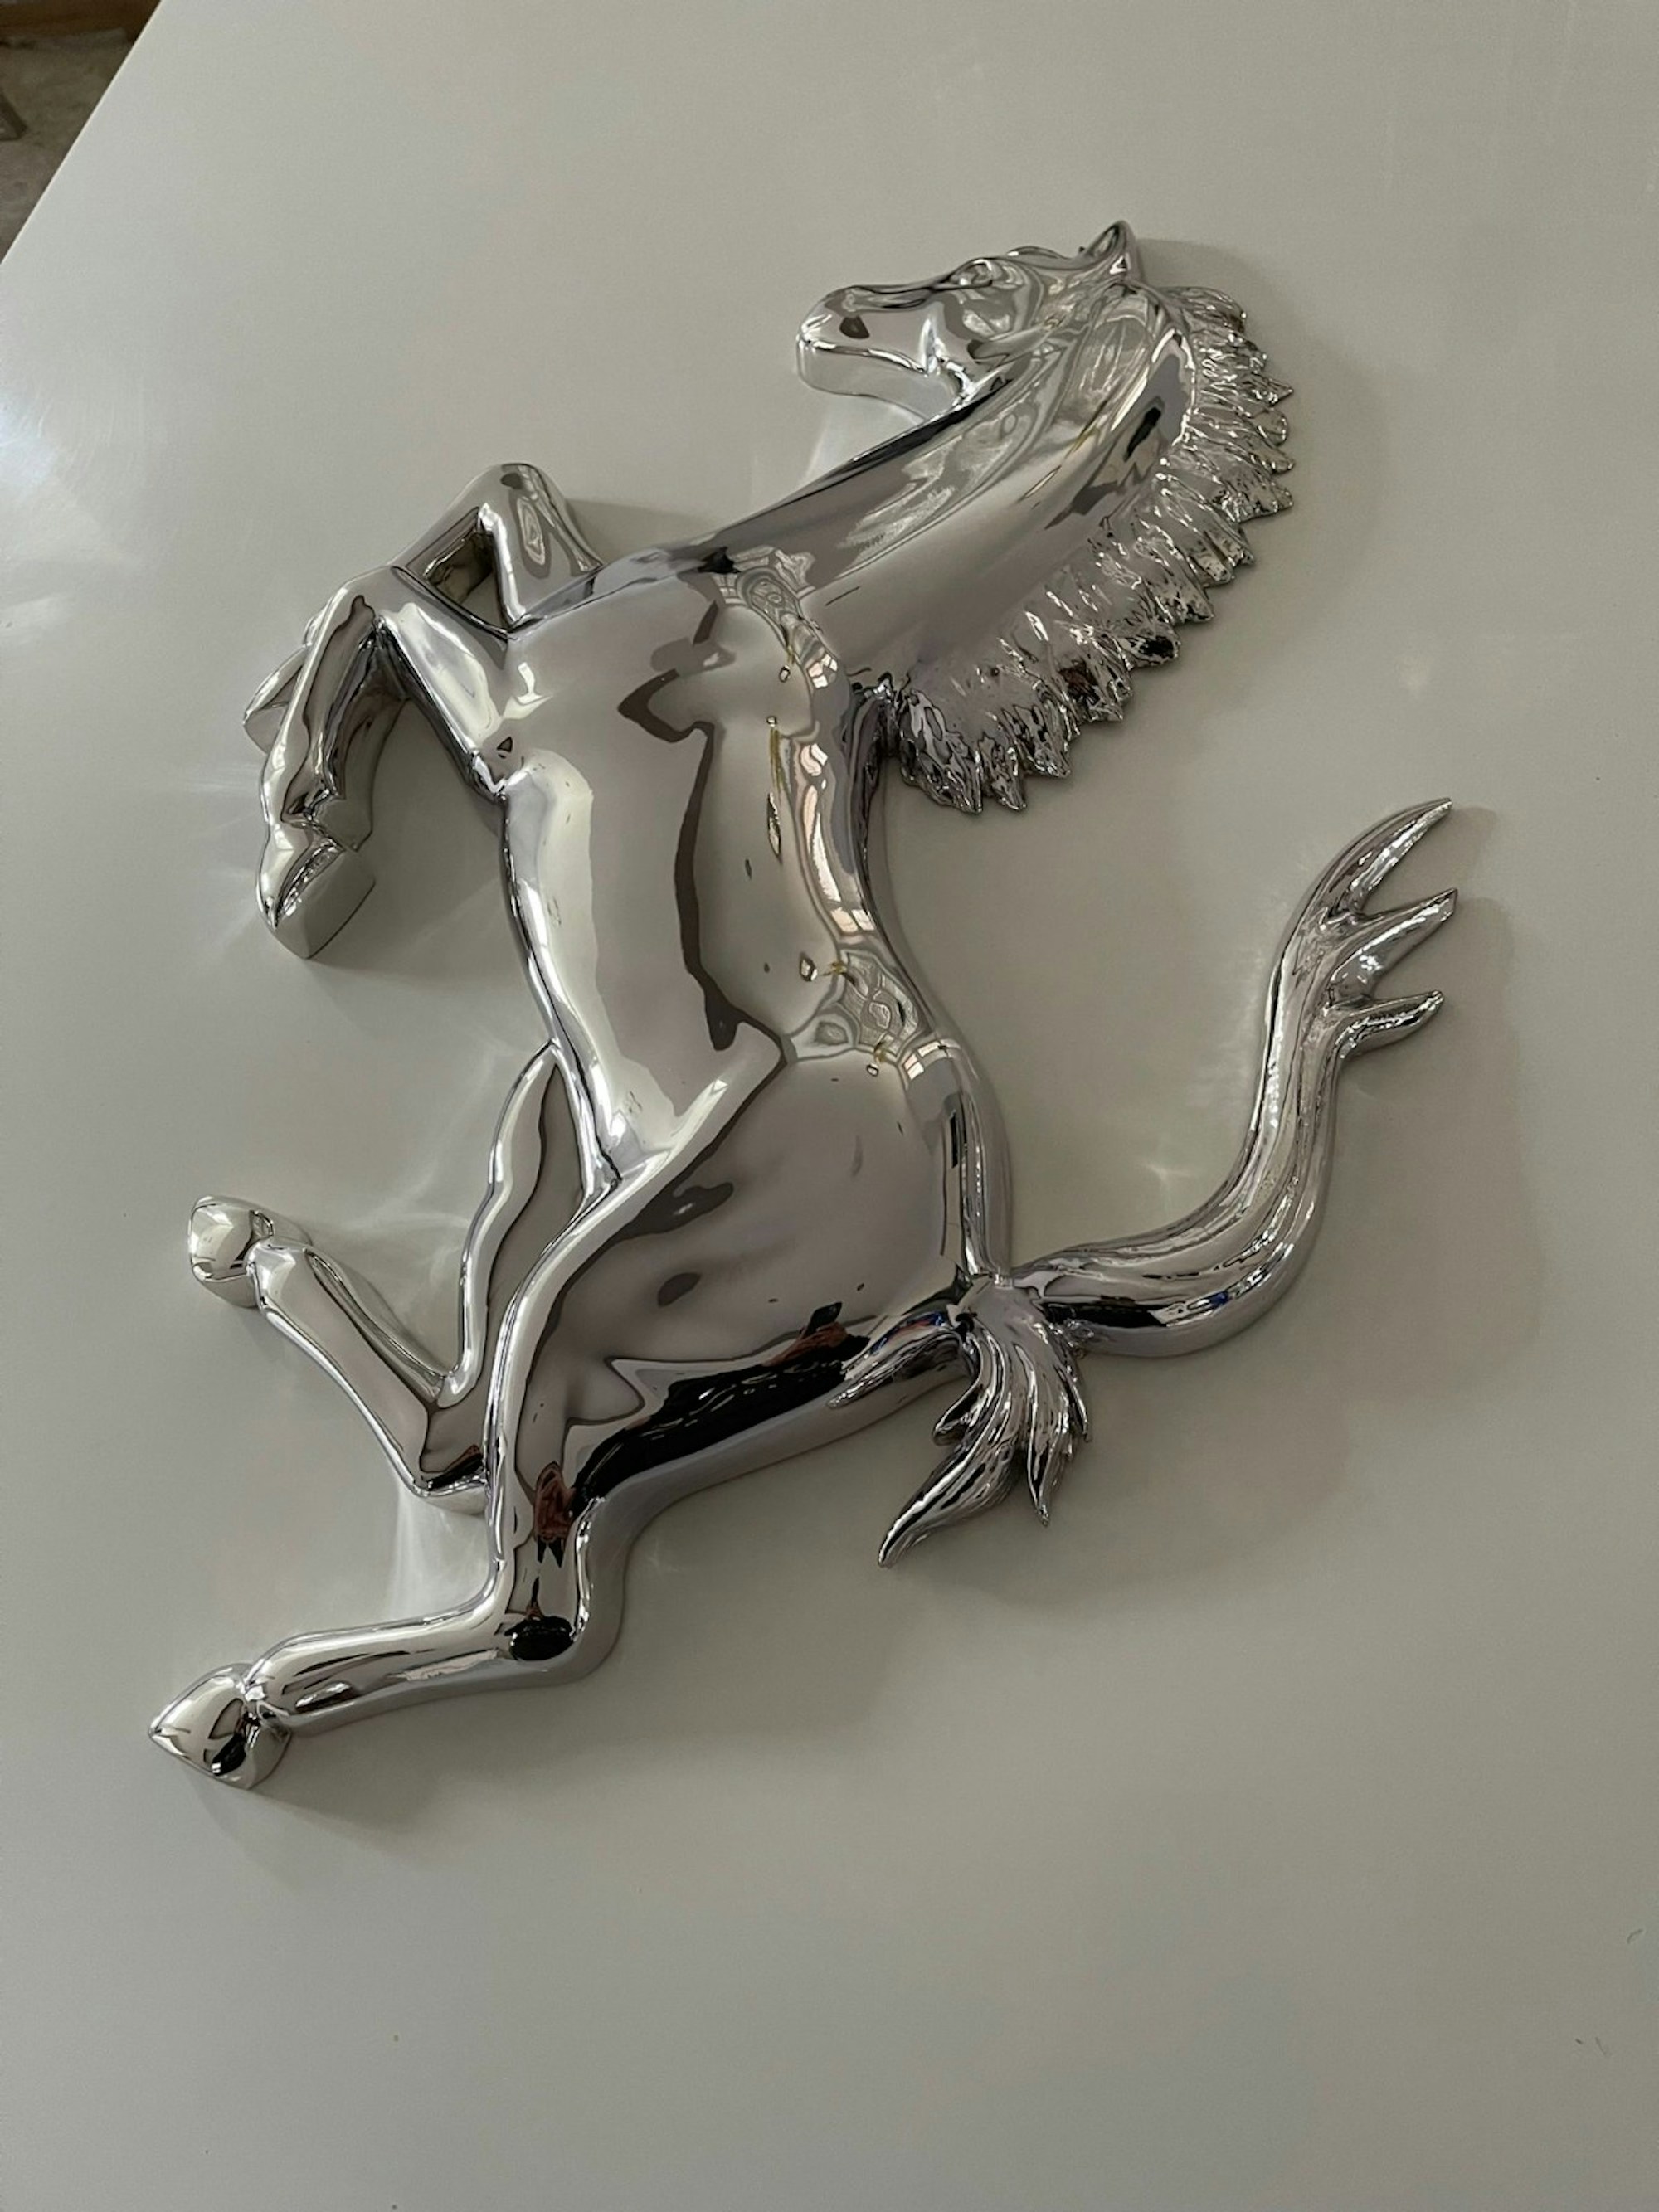 CHARITY AUCTION - FERRARI 'CAVALLINO RAMPANTE' SIGN for sale by auction in  Hertfordshire, United Kingdom